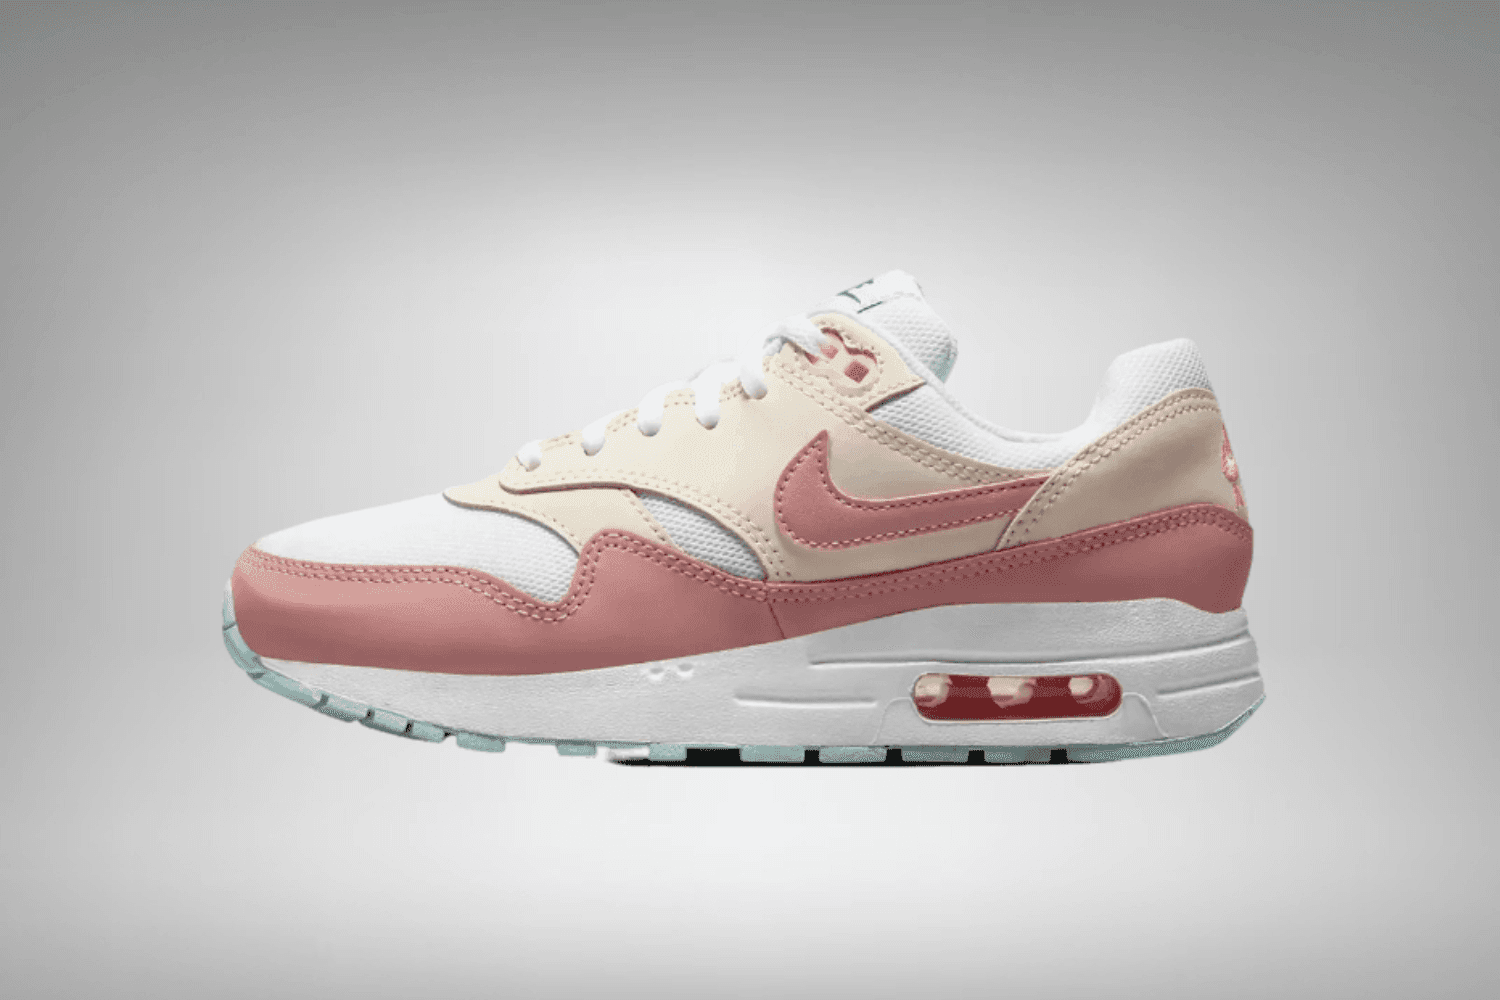 Nike reveals official images of the Air Max 1 'Ice Cream'